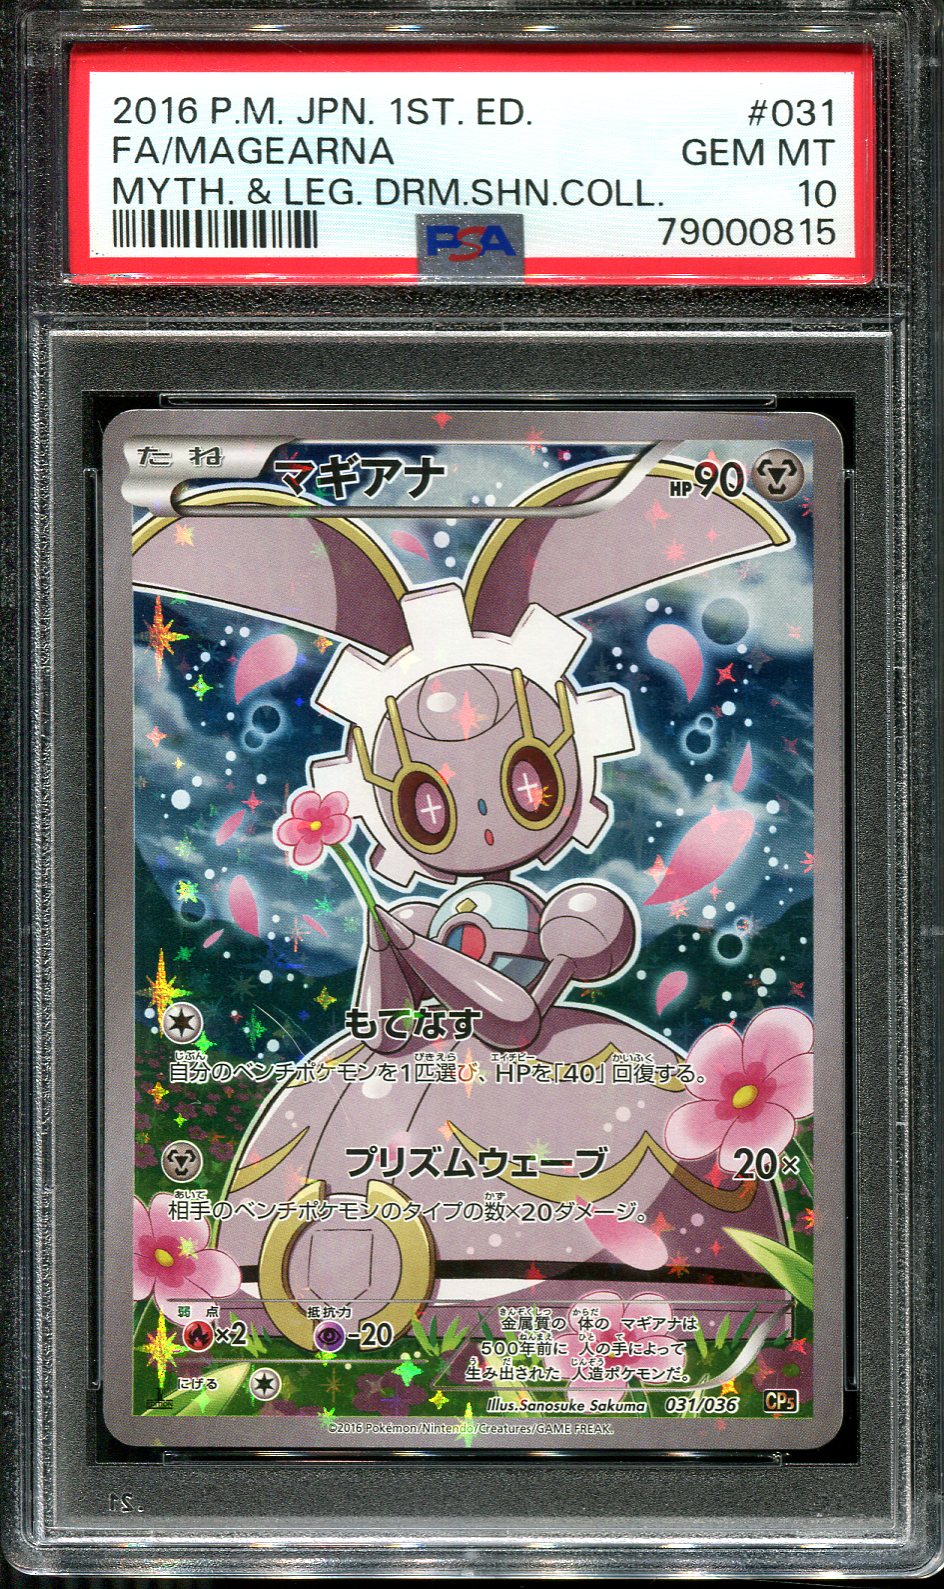 MAGEARNA 031/036 PSA 10 CP5 MYTHICAL DREAM SHINE COLLECTION POKEMON JAPANESE